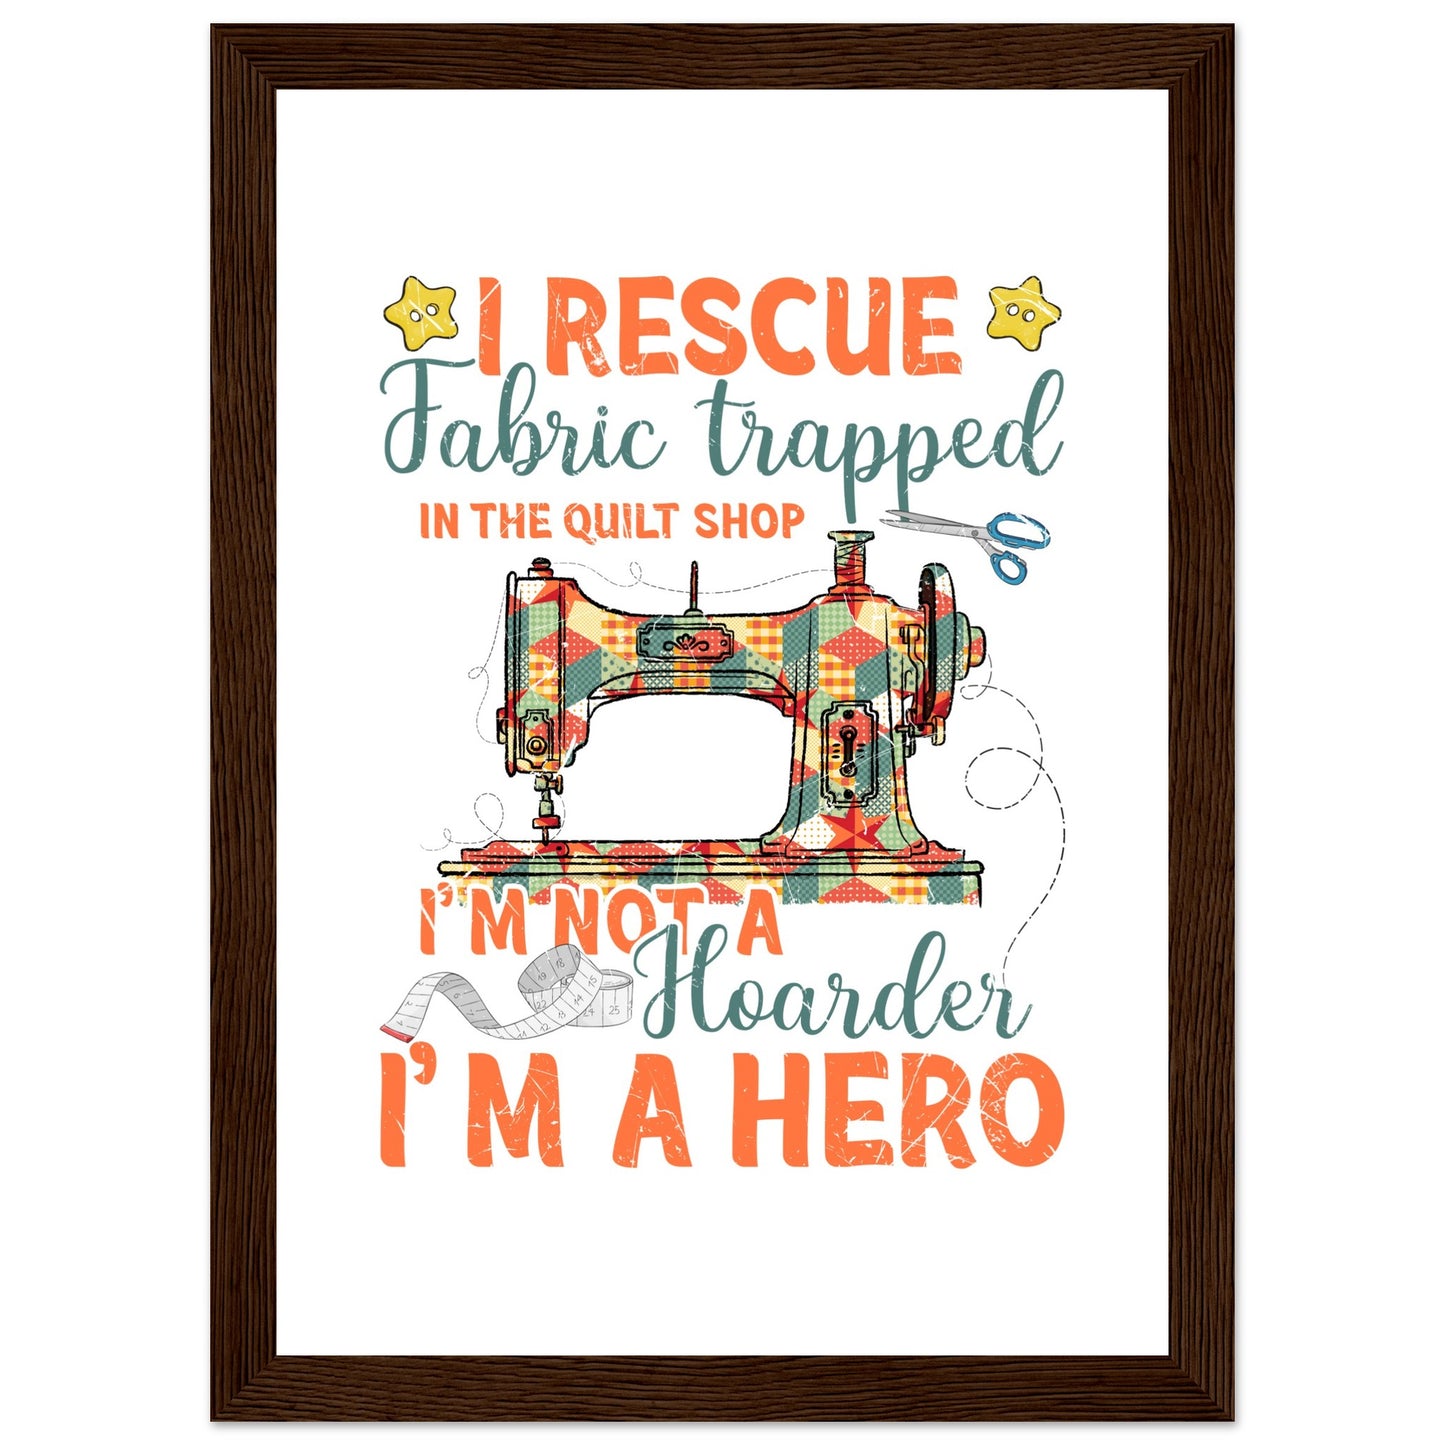 I Rescue Fabric Trapped in the Quilt Shop - Quilting Wall Art - Premium Matte Paper Wooden Framed Poster